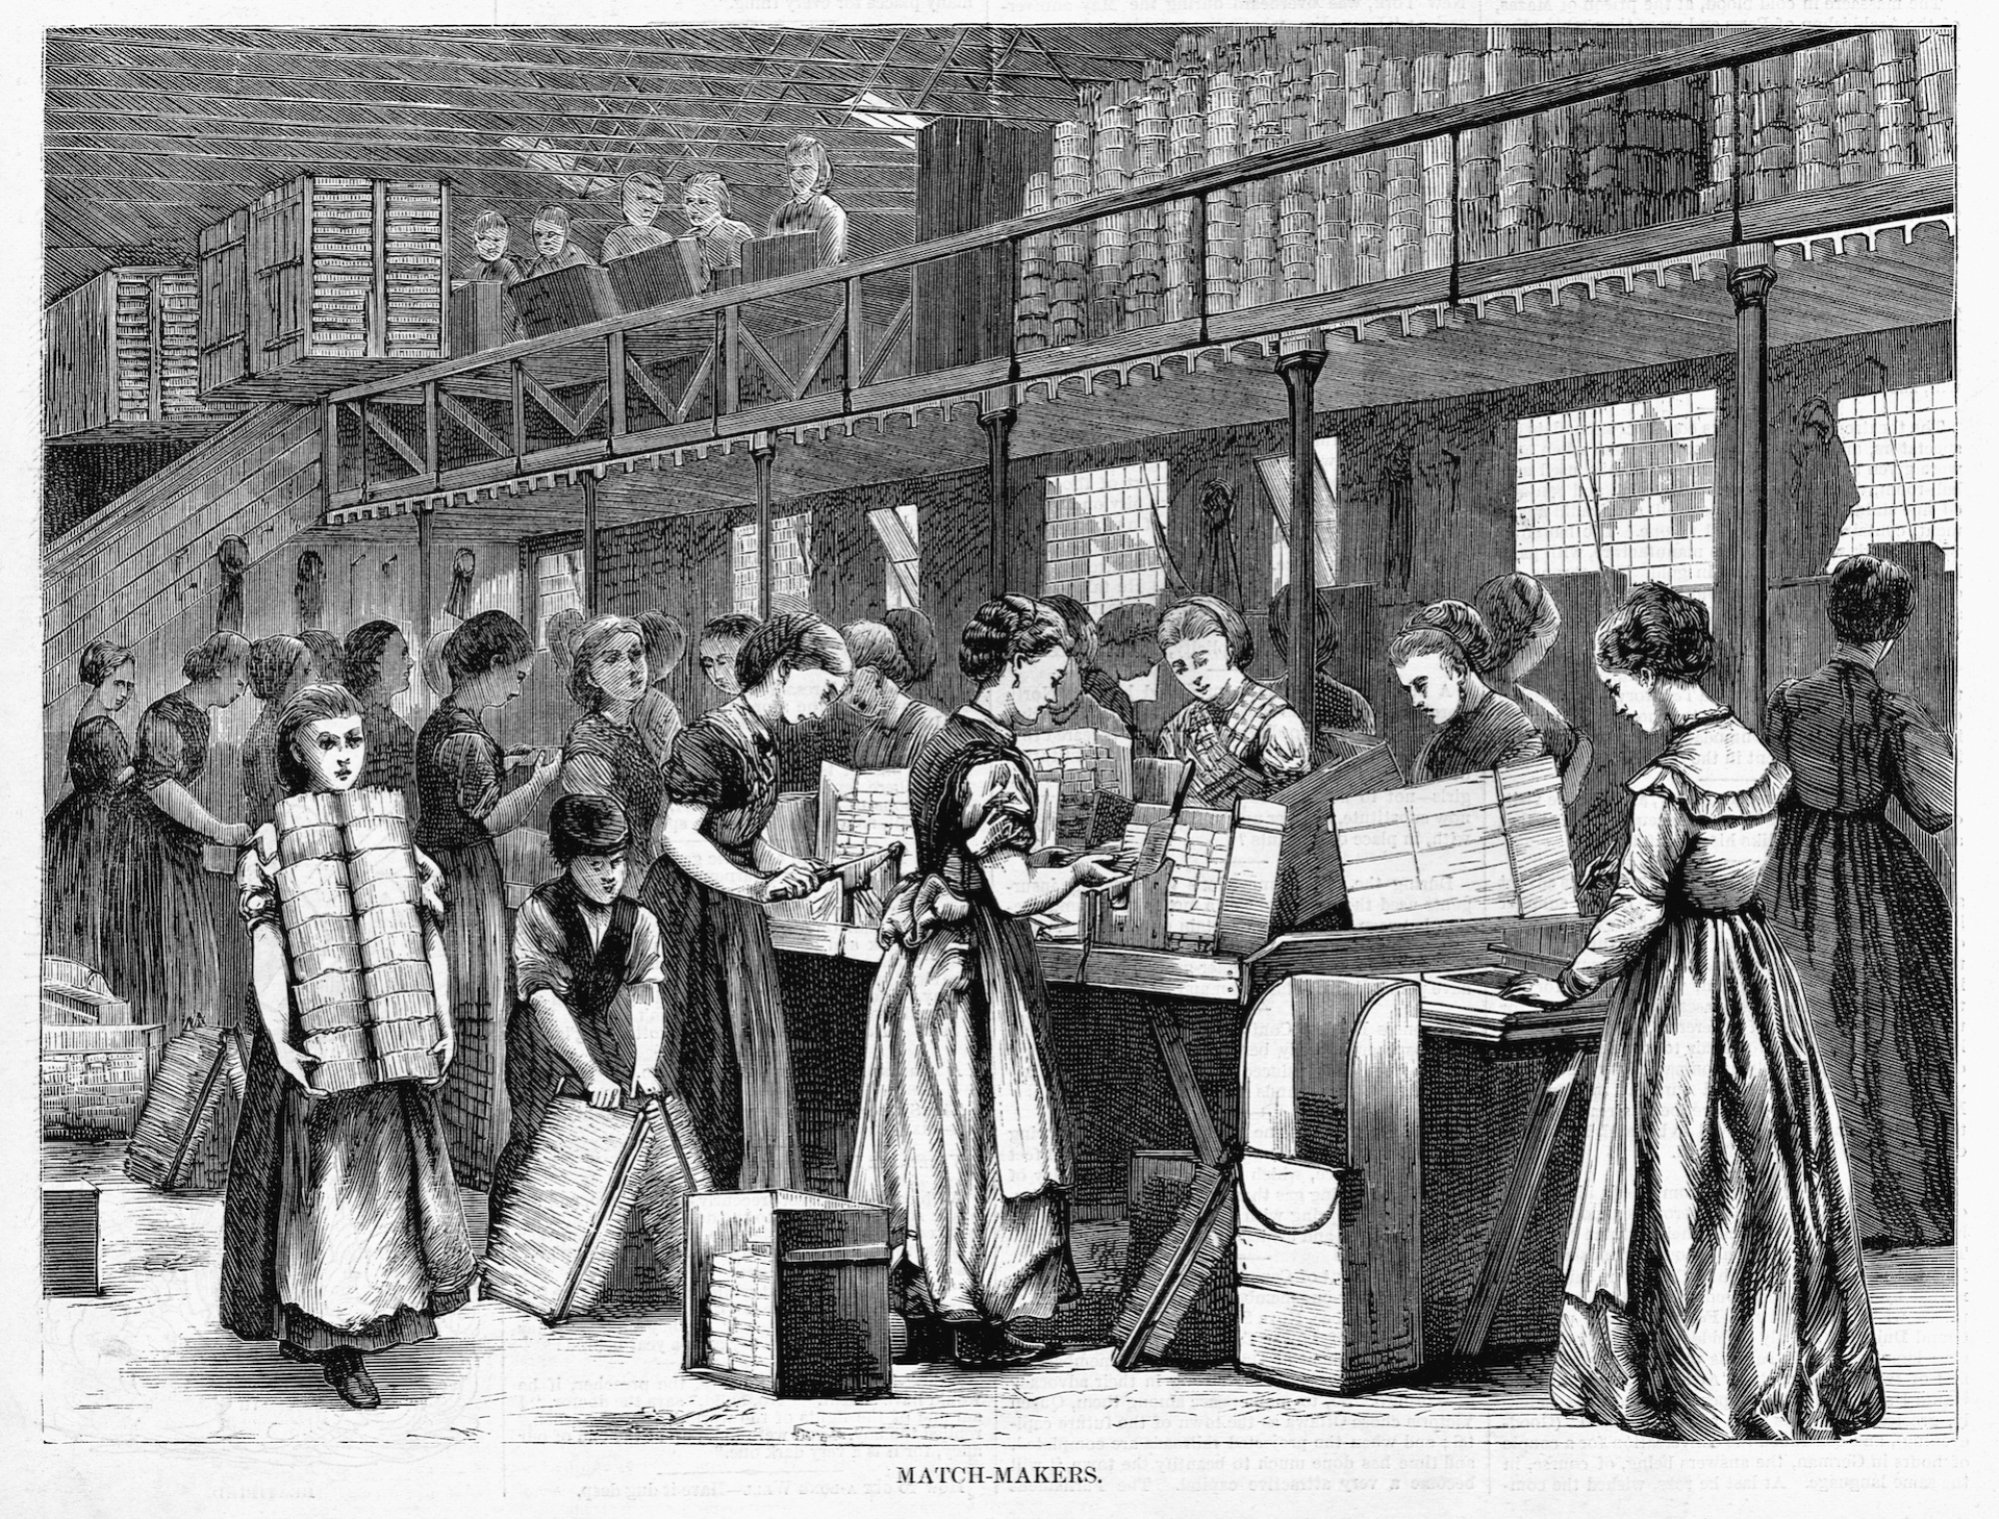 An illustration of women making matches in a factory in London, England. Ca. 1871.